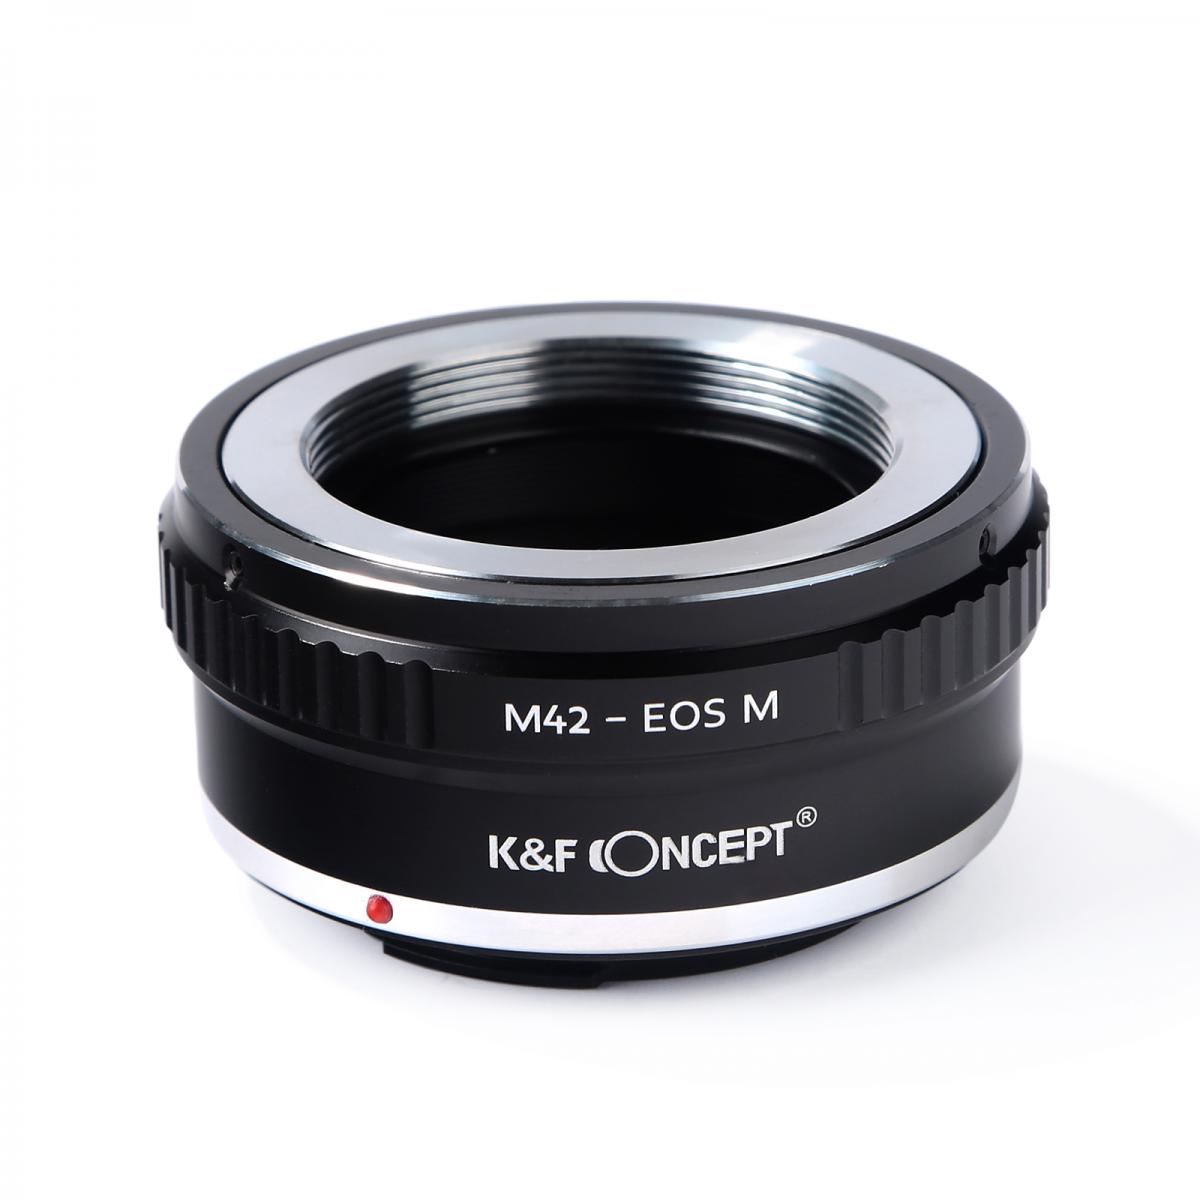 K&F Concept Lens Adapter KF06.137 for M42 - EOS M